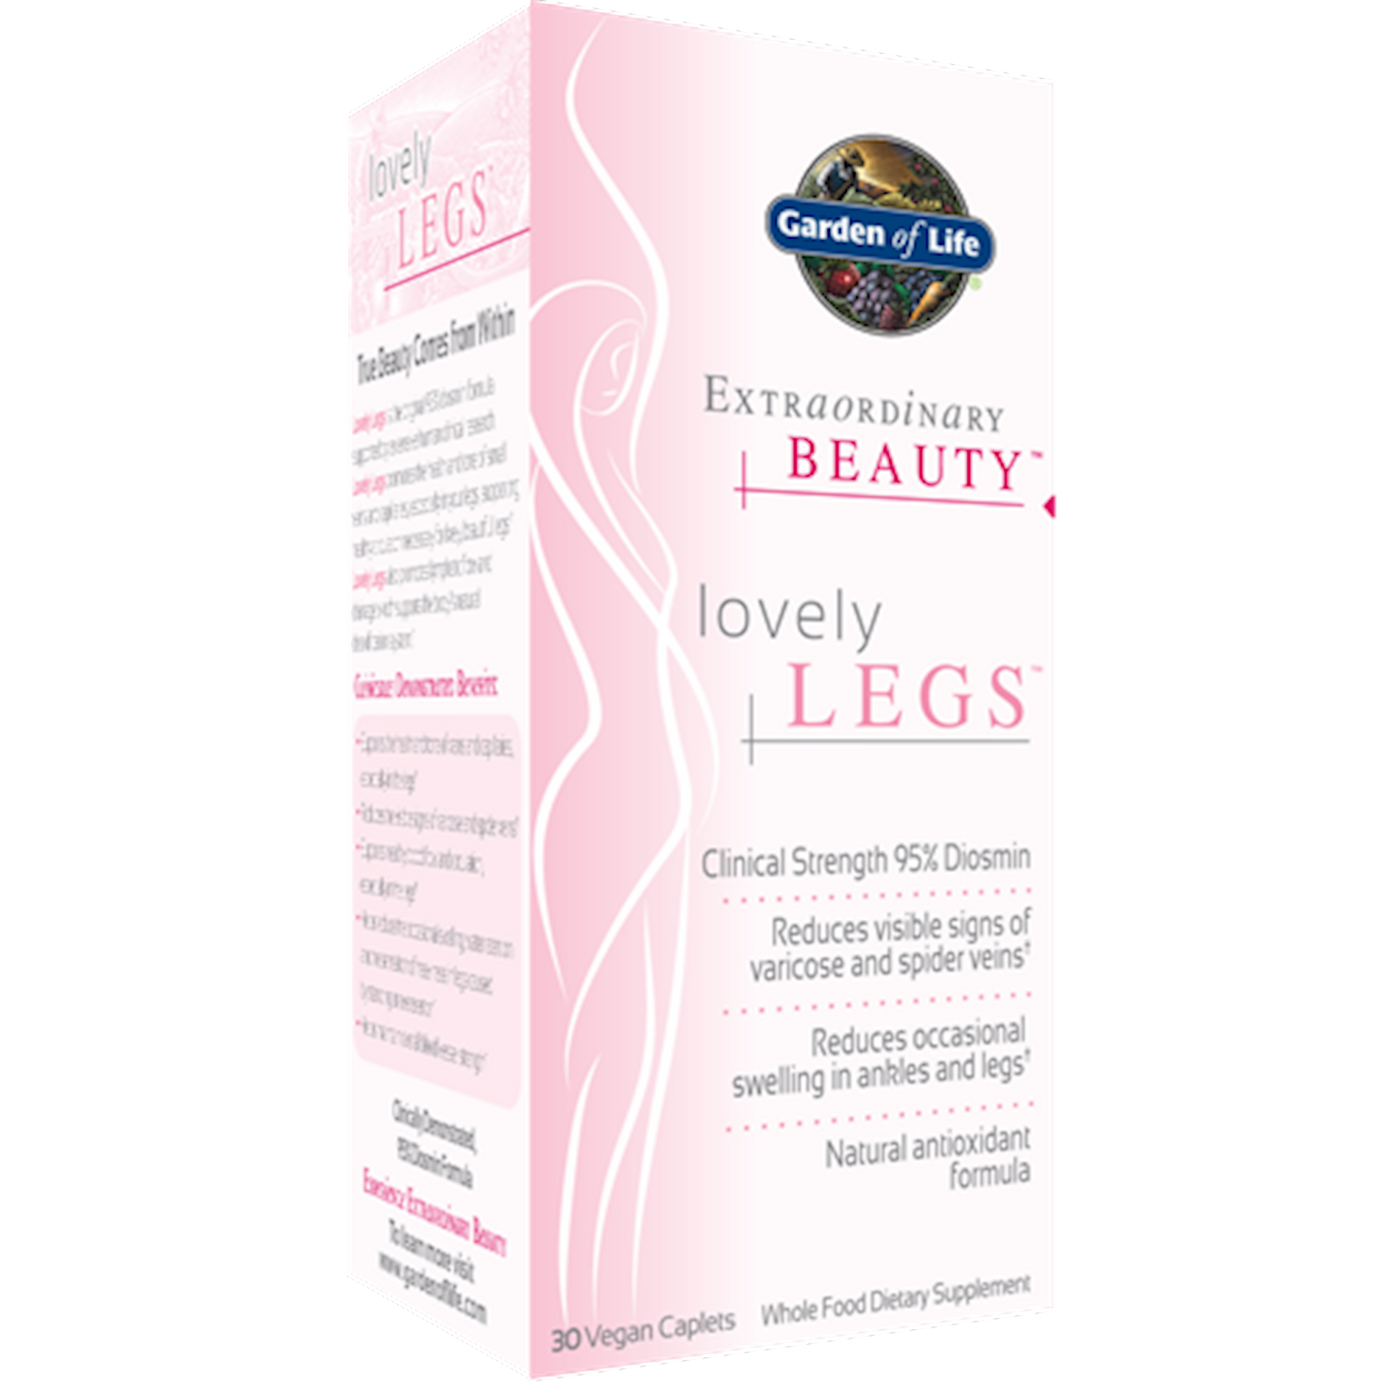 Lovely Legs s Curated Wellness